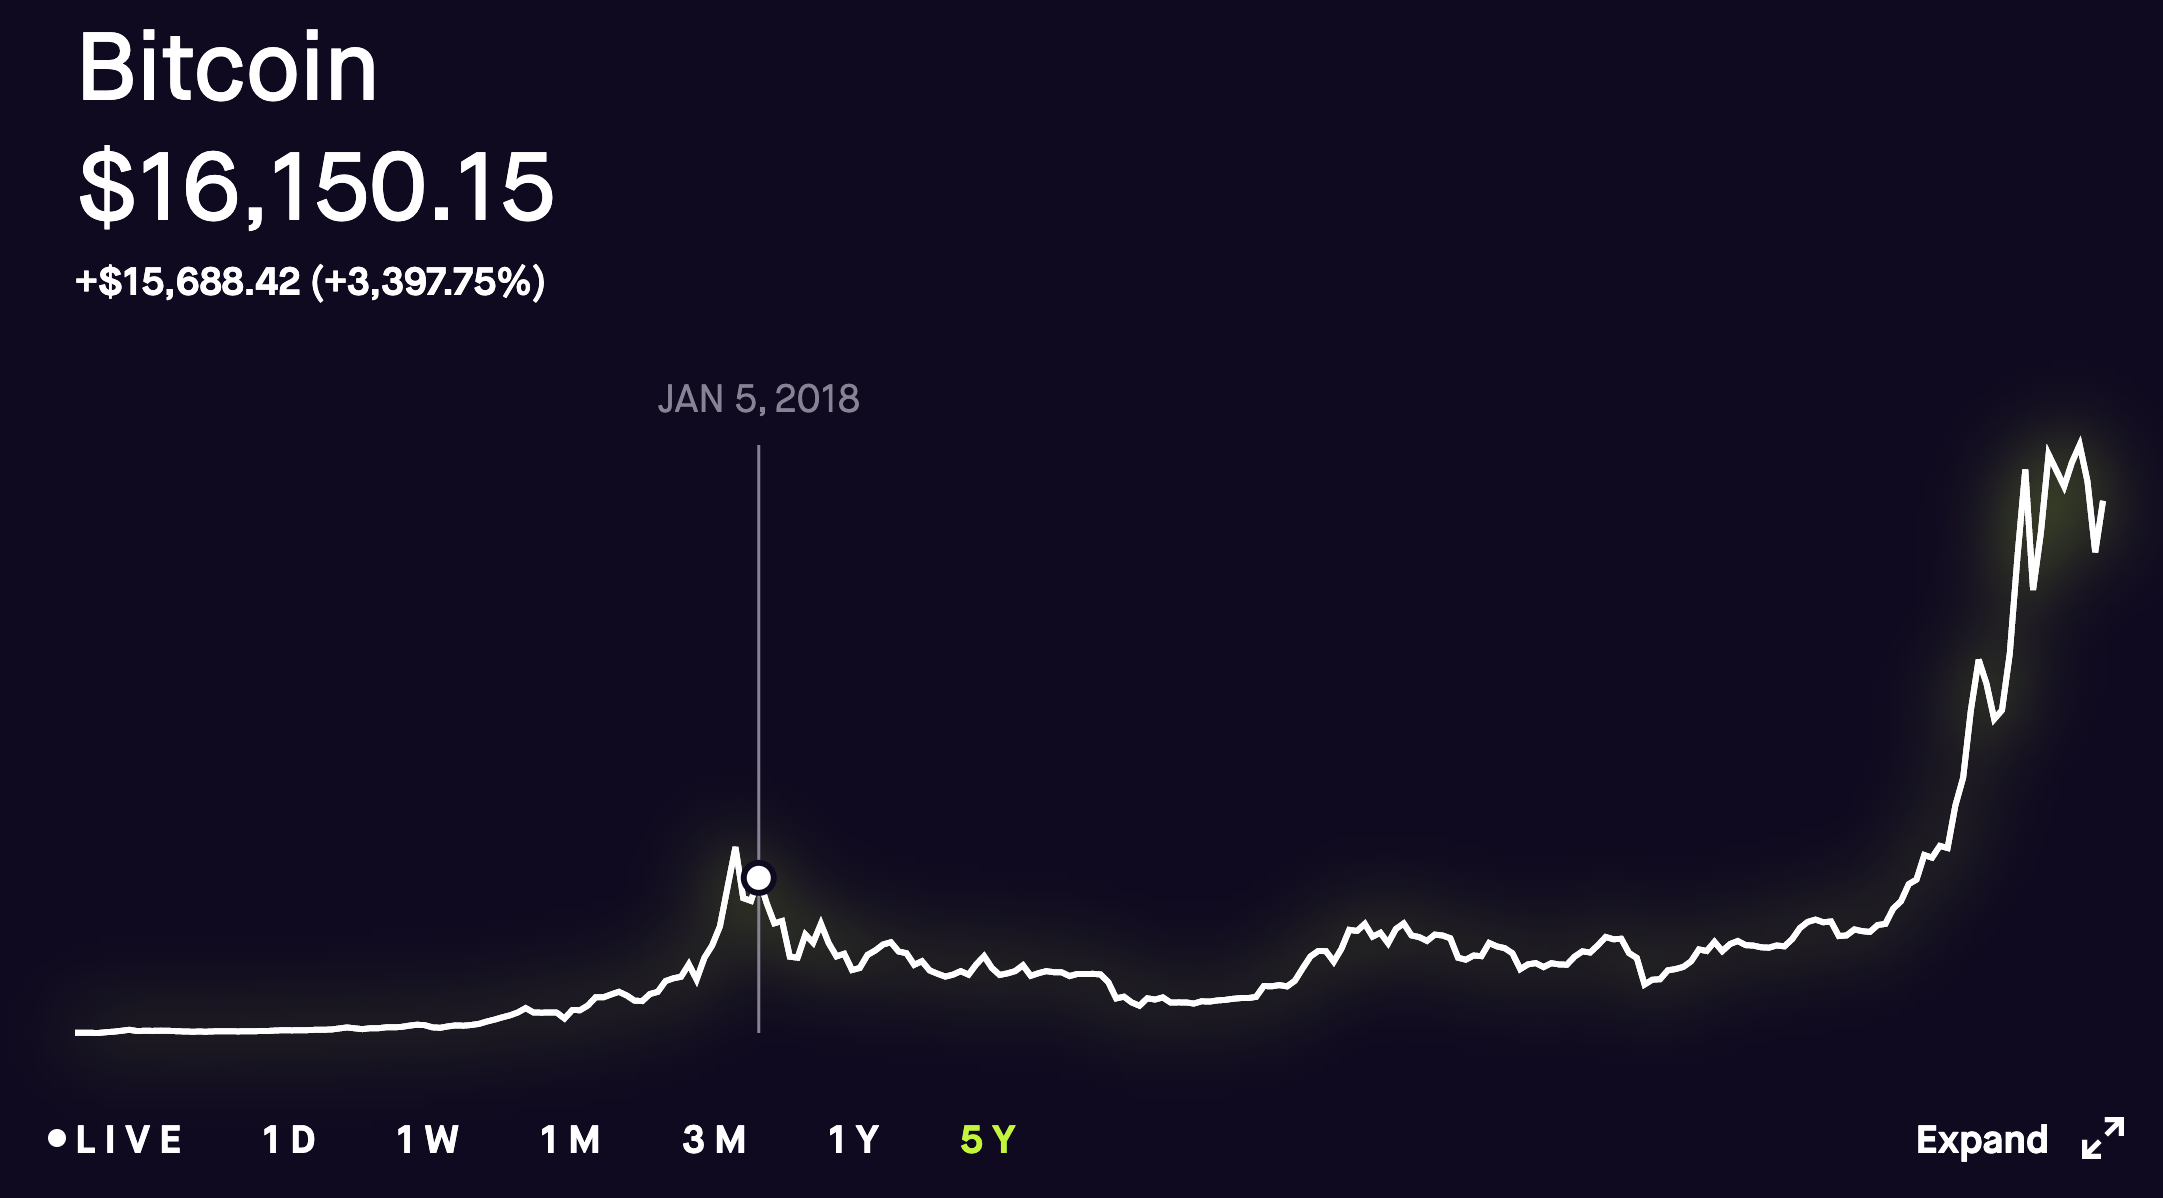 The price of Bitcoin in January 2018 (over 16k)